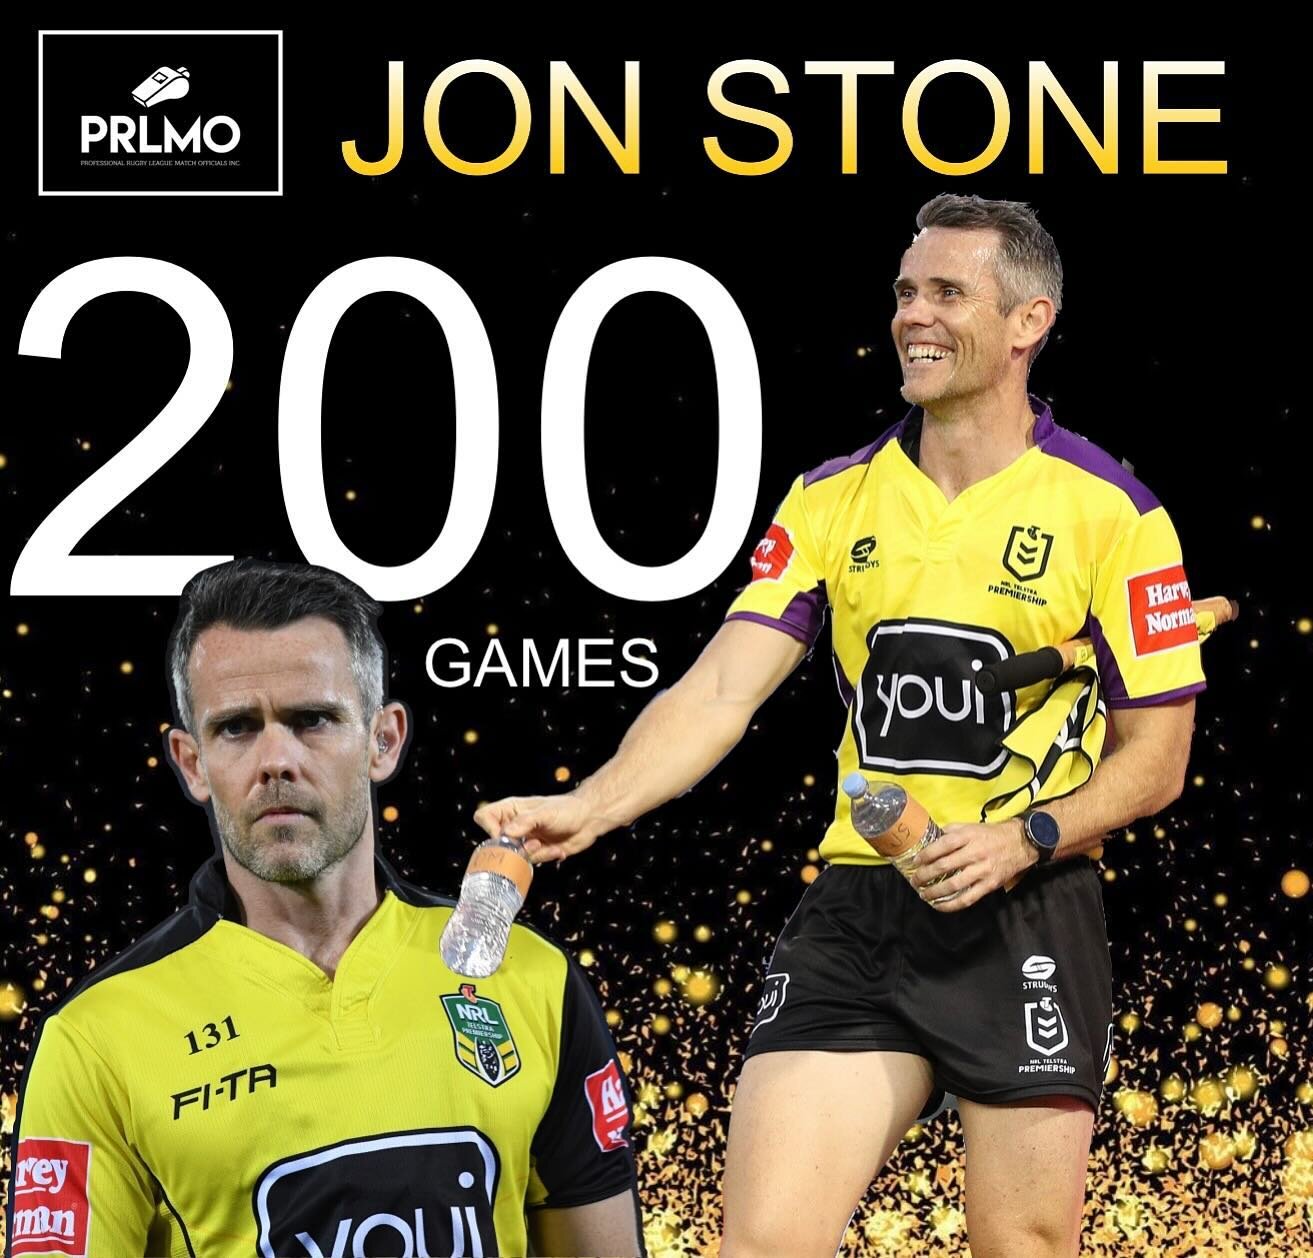 A massive congratulations to Jon Stone, who will officiate in NRL game 2️⃣0️⃣0️⃣ of his career, when the Sea Eagles play the Roosters at 4 Pines Park on Sunday 🏉

Jon&rsquo;s decorated NRL career thus far has included 68 games as a referee, and Sund